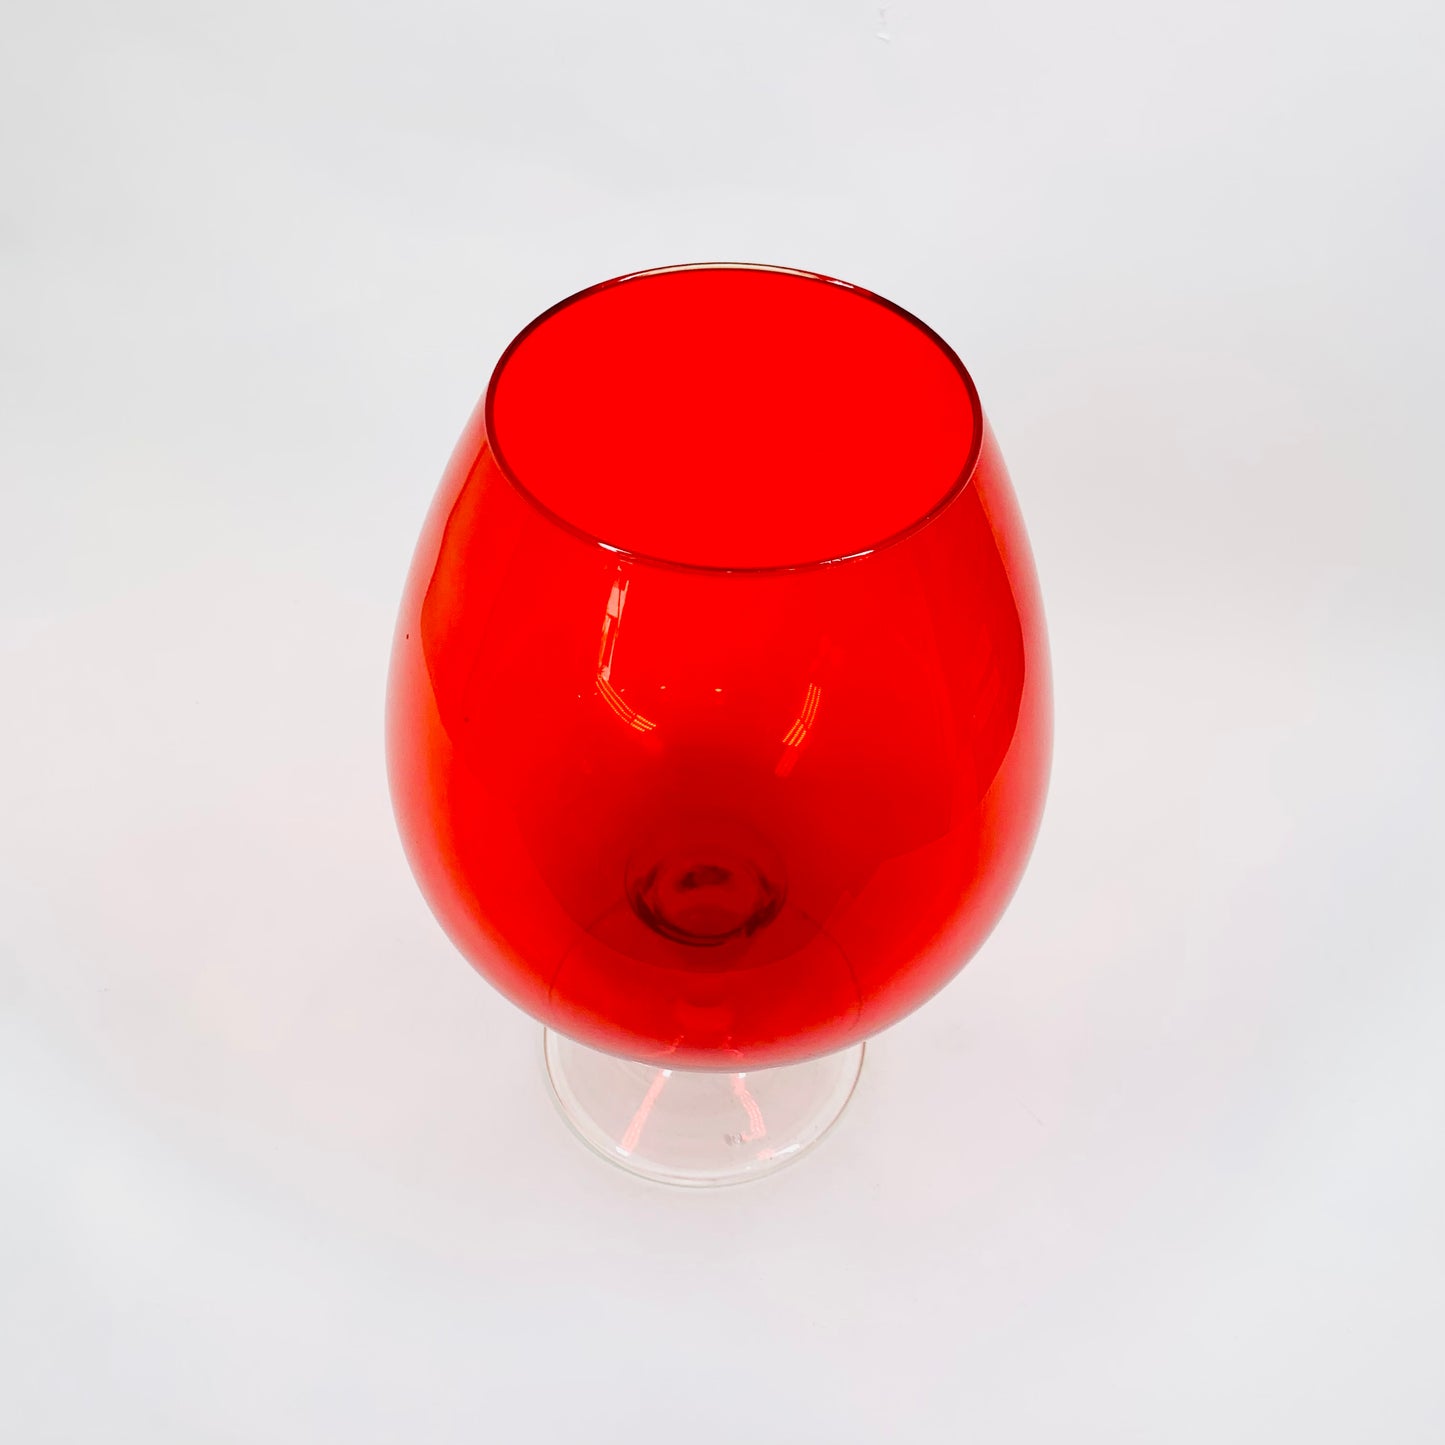 Large Midcentury Italian red glass brandy balloon vase with clear stem